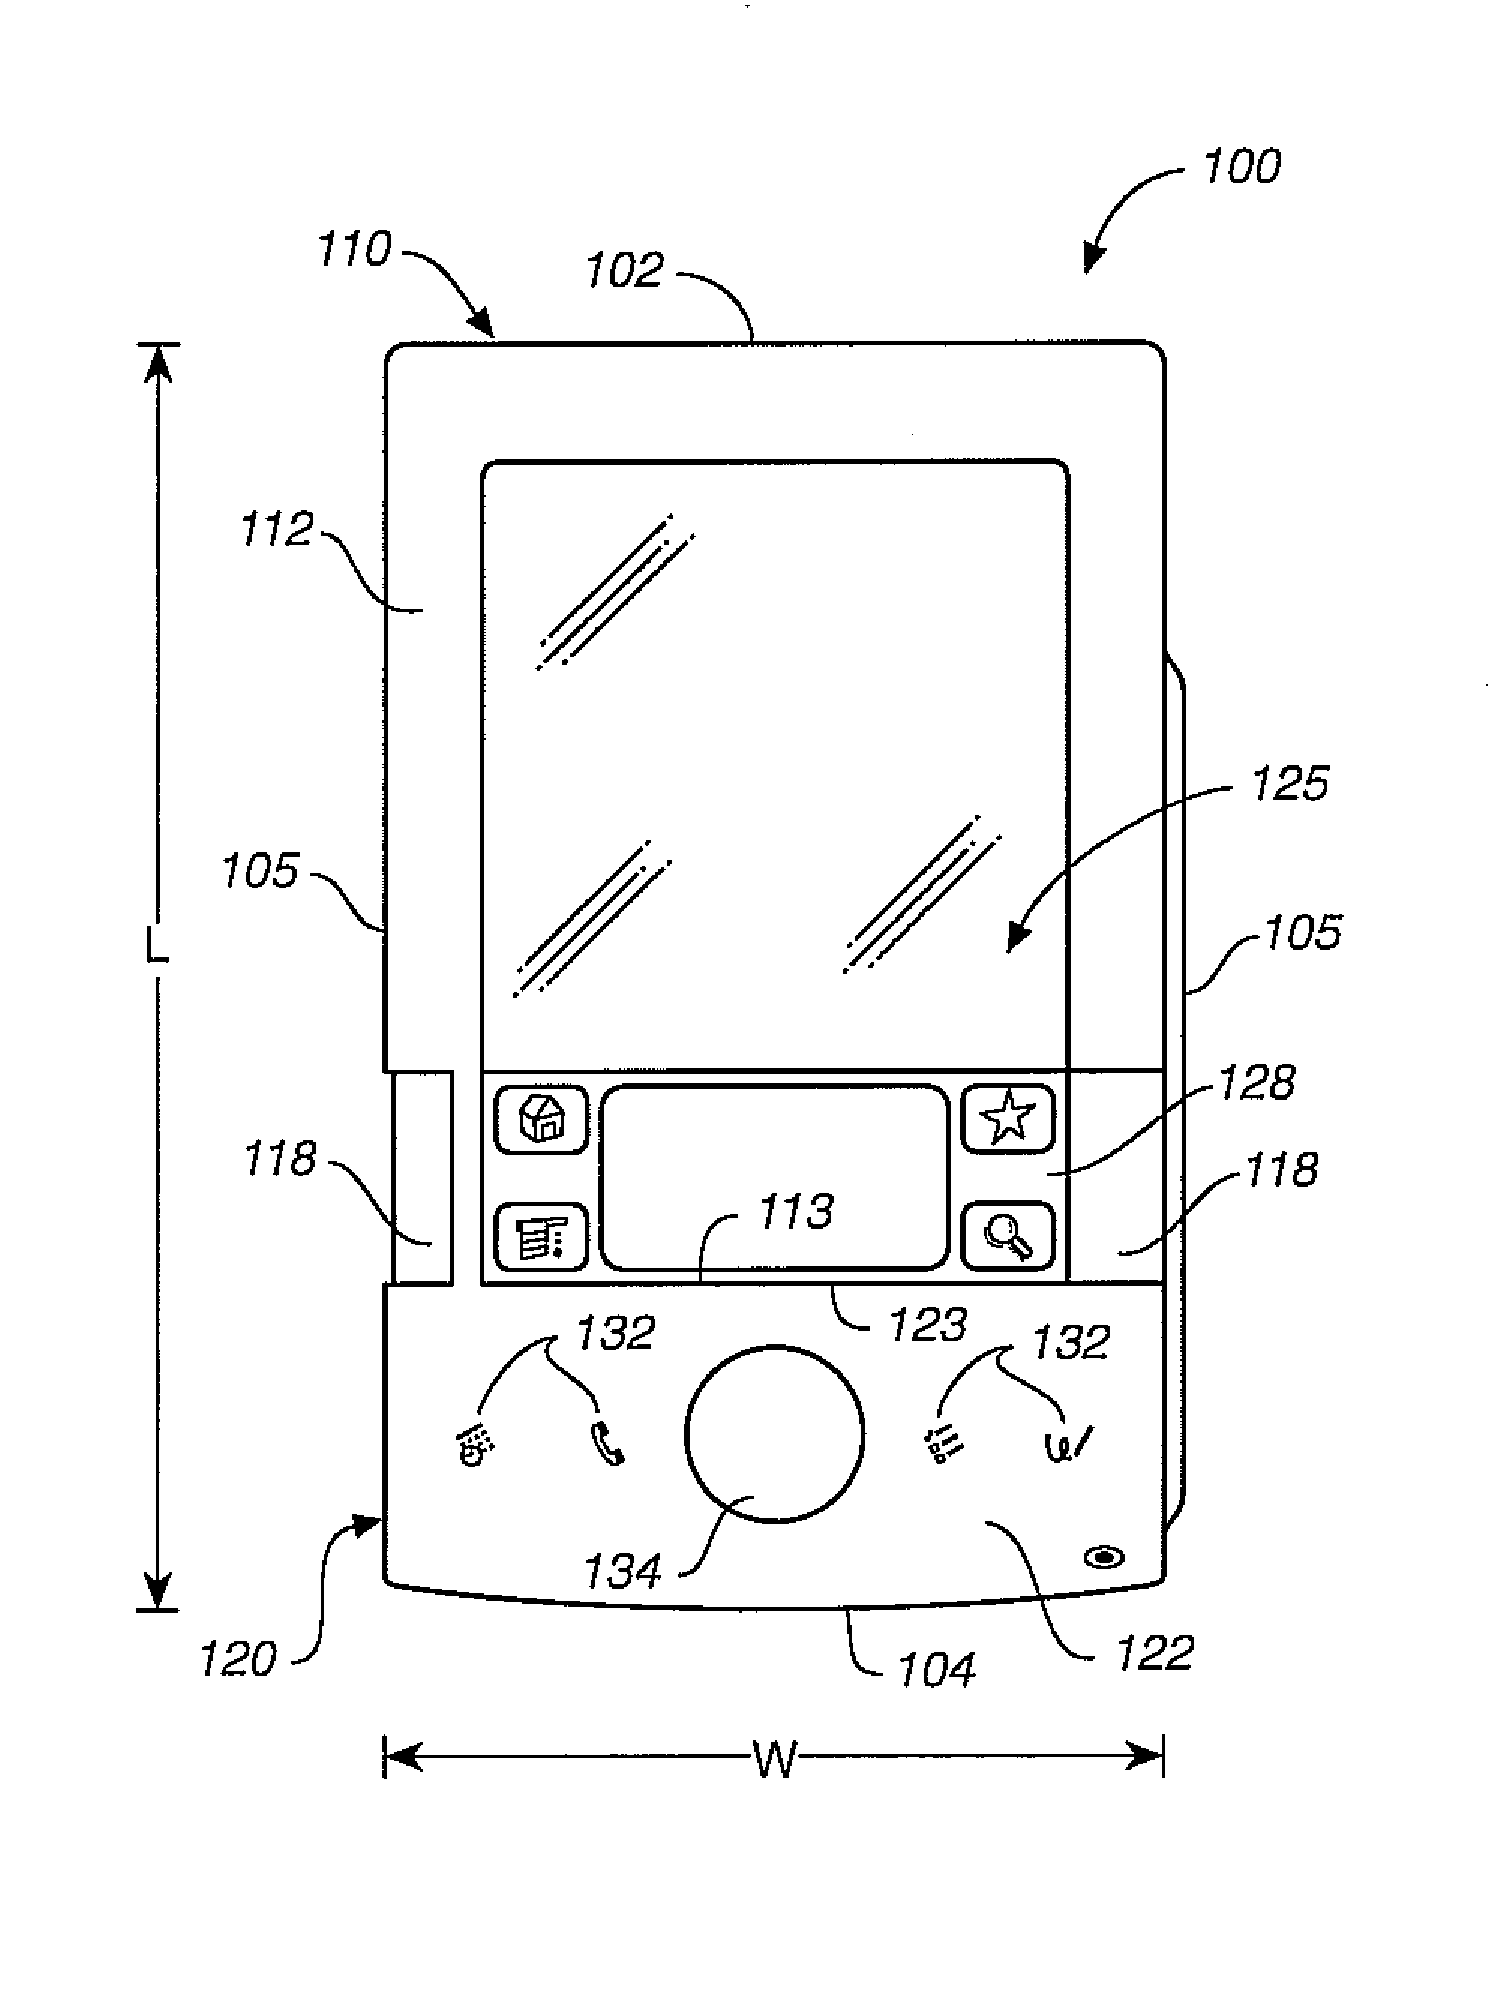 Handheld computer having moveable segments that are interactive with an integrated display